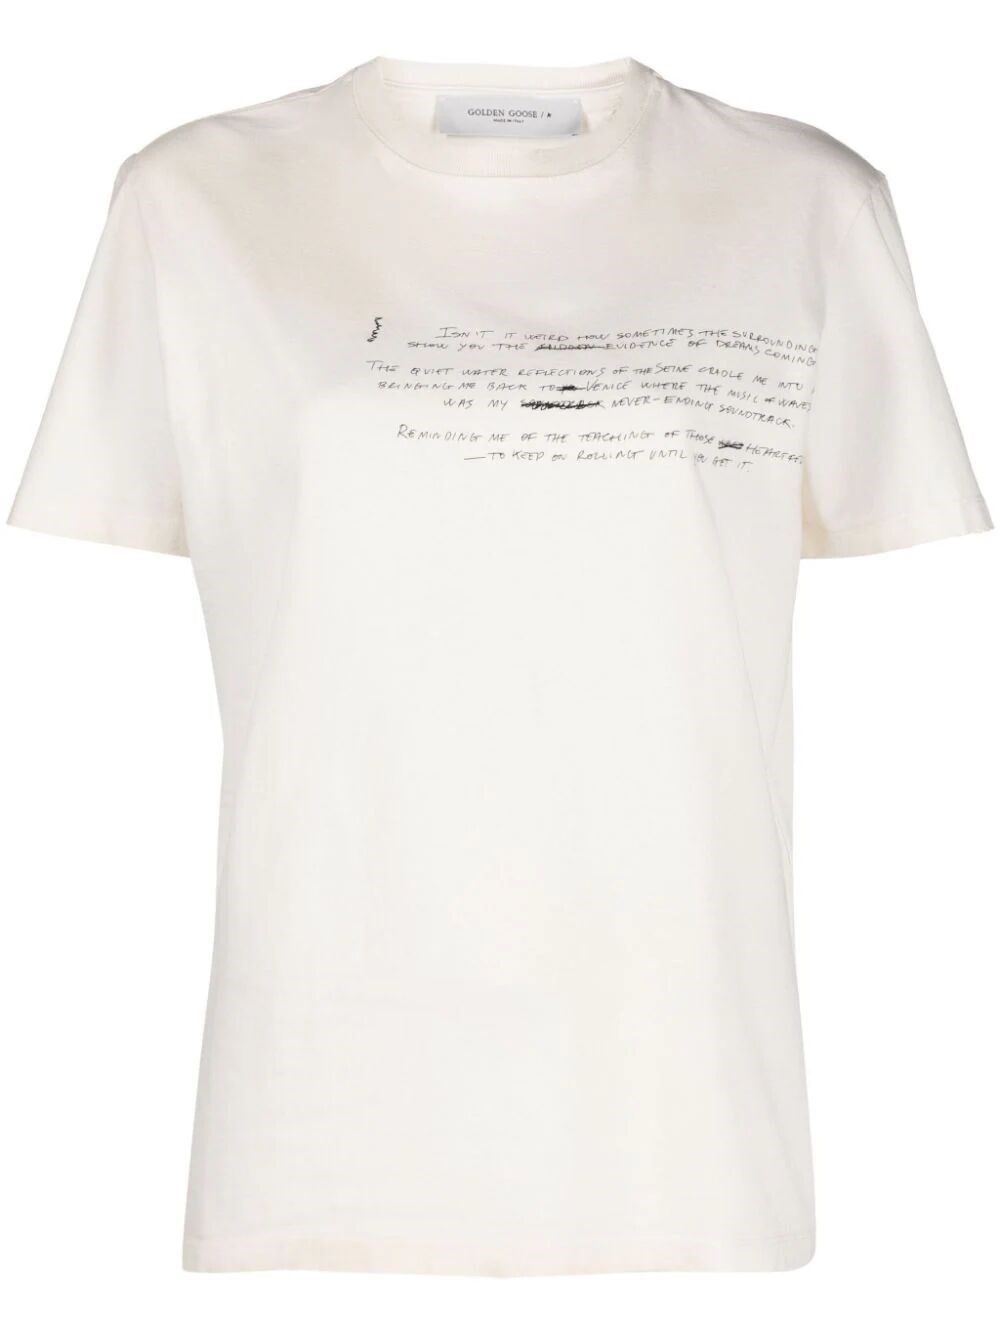 Shop Golden Goose Embroidered Lettering T-shirt In White